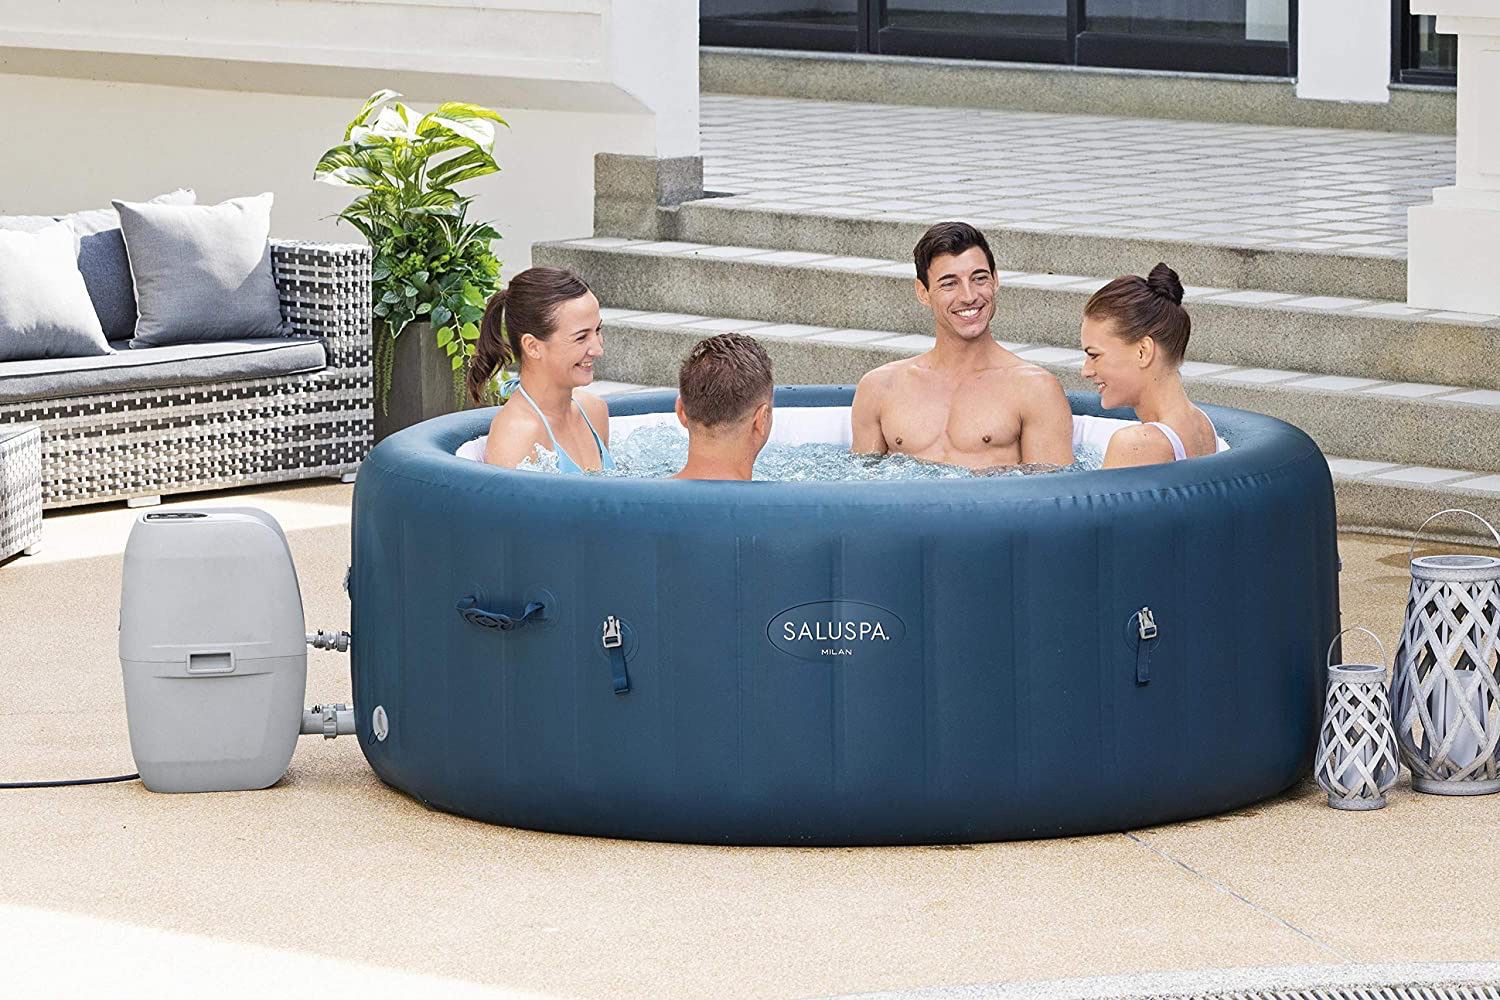 Saluspa Milan 4-6 Person Hot Tub Spa Inflatable With Wifi 